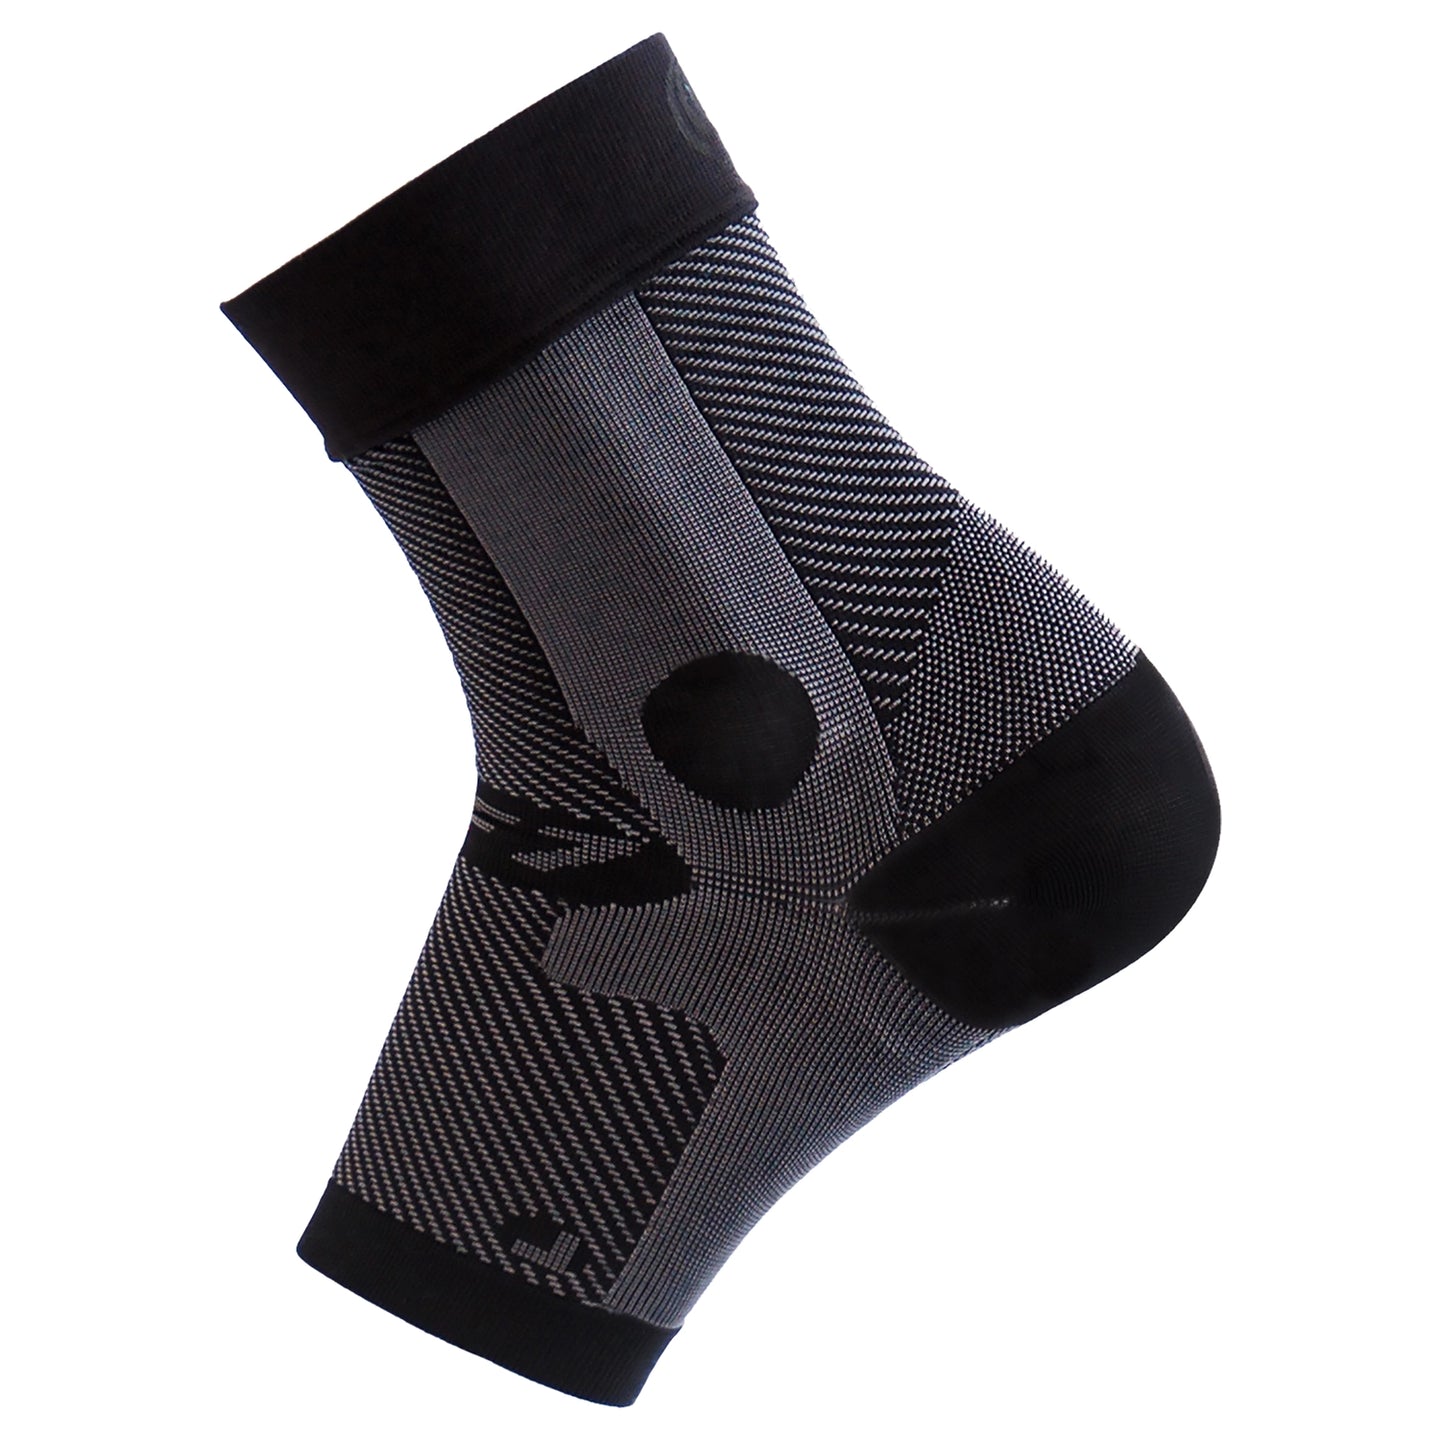 Thigh Sleeve - QS4 Sleeve - The Foot and Ankle Clinic